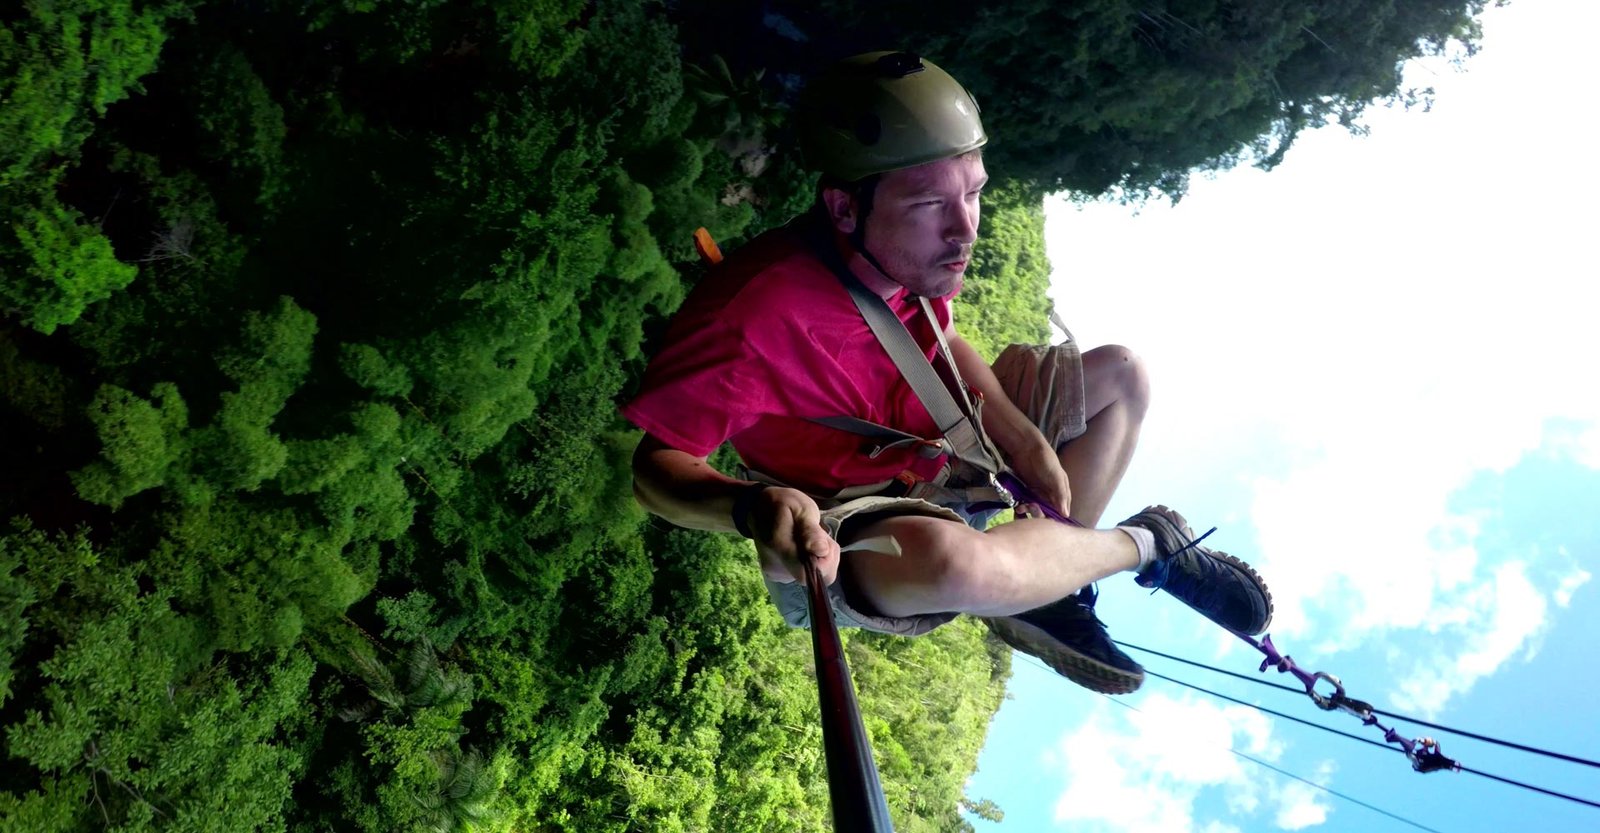 One of the Best Excursions in Samana : Zipline Tour and Excursion from Las Terrenas, Samana Dominican Republic.